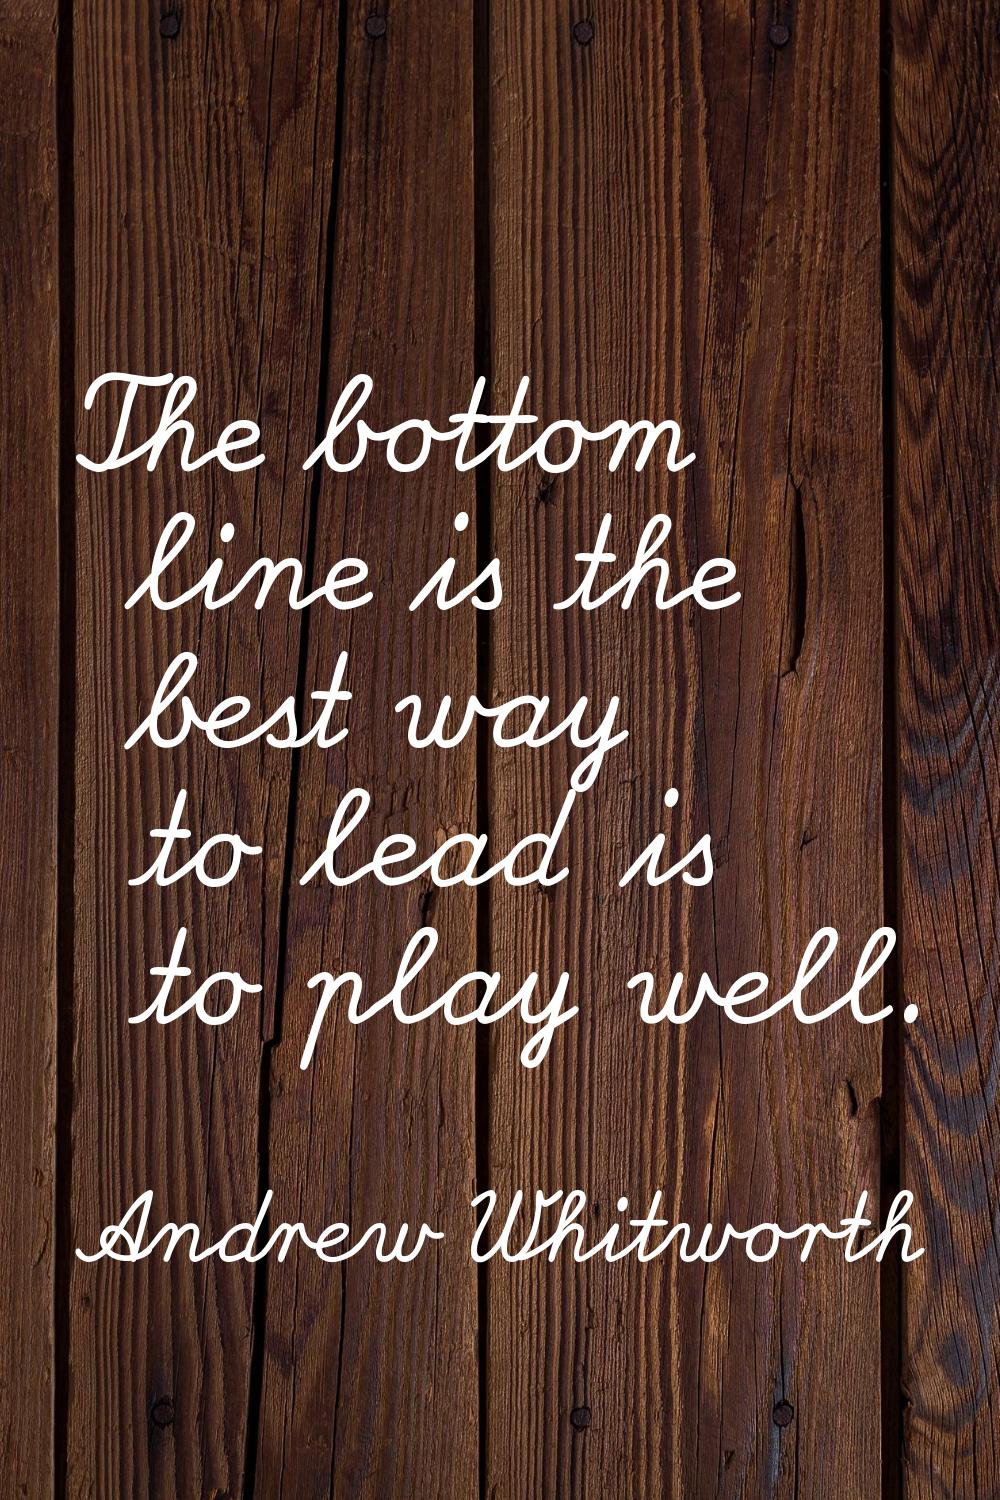 The bottom line is the best way to lead is to play well.